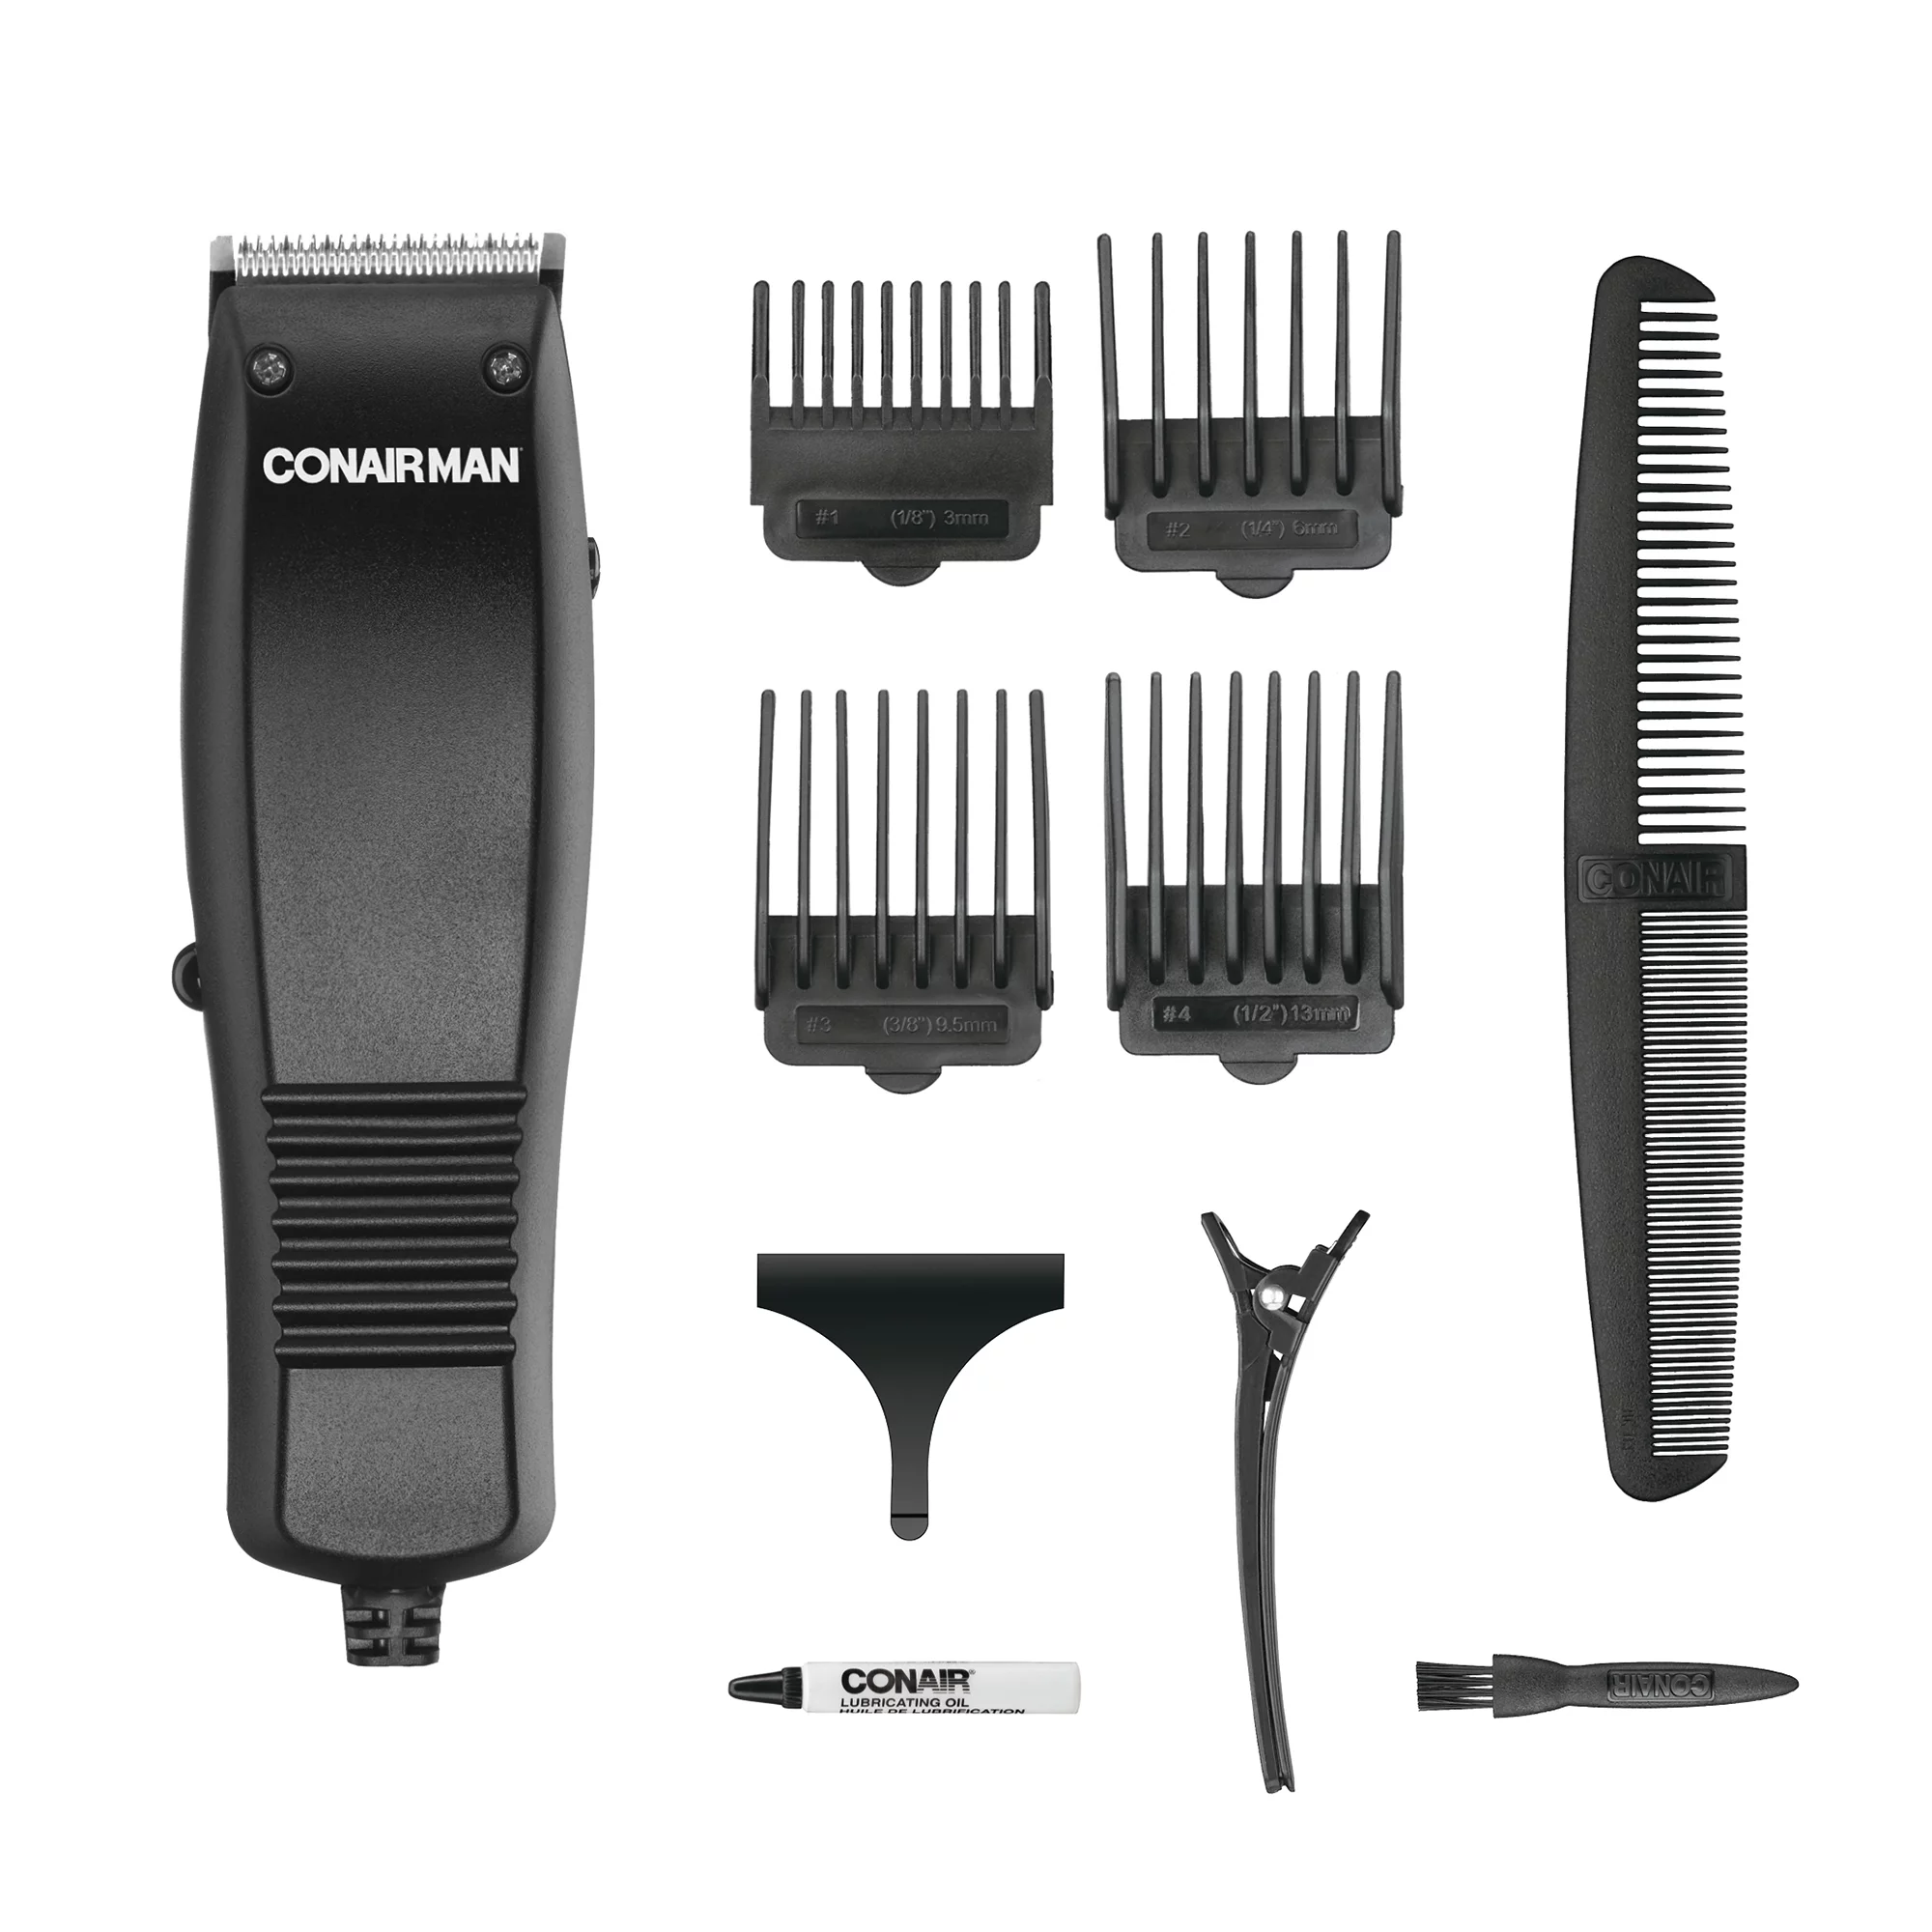 ConairMAN Professional Men's Haircut Kit, 10 Piece Kit with Basic Clipper, Guide Combs, & Accessories, HC93W